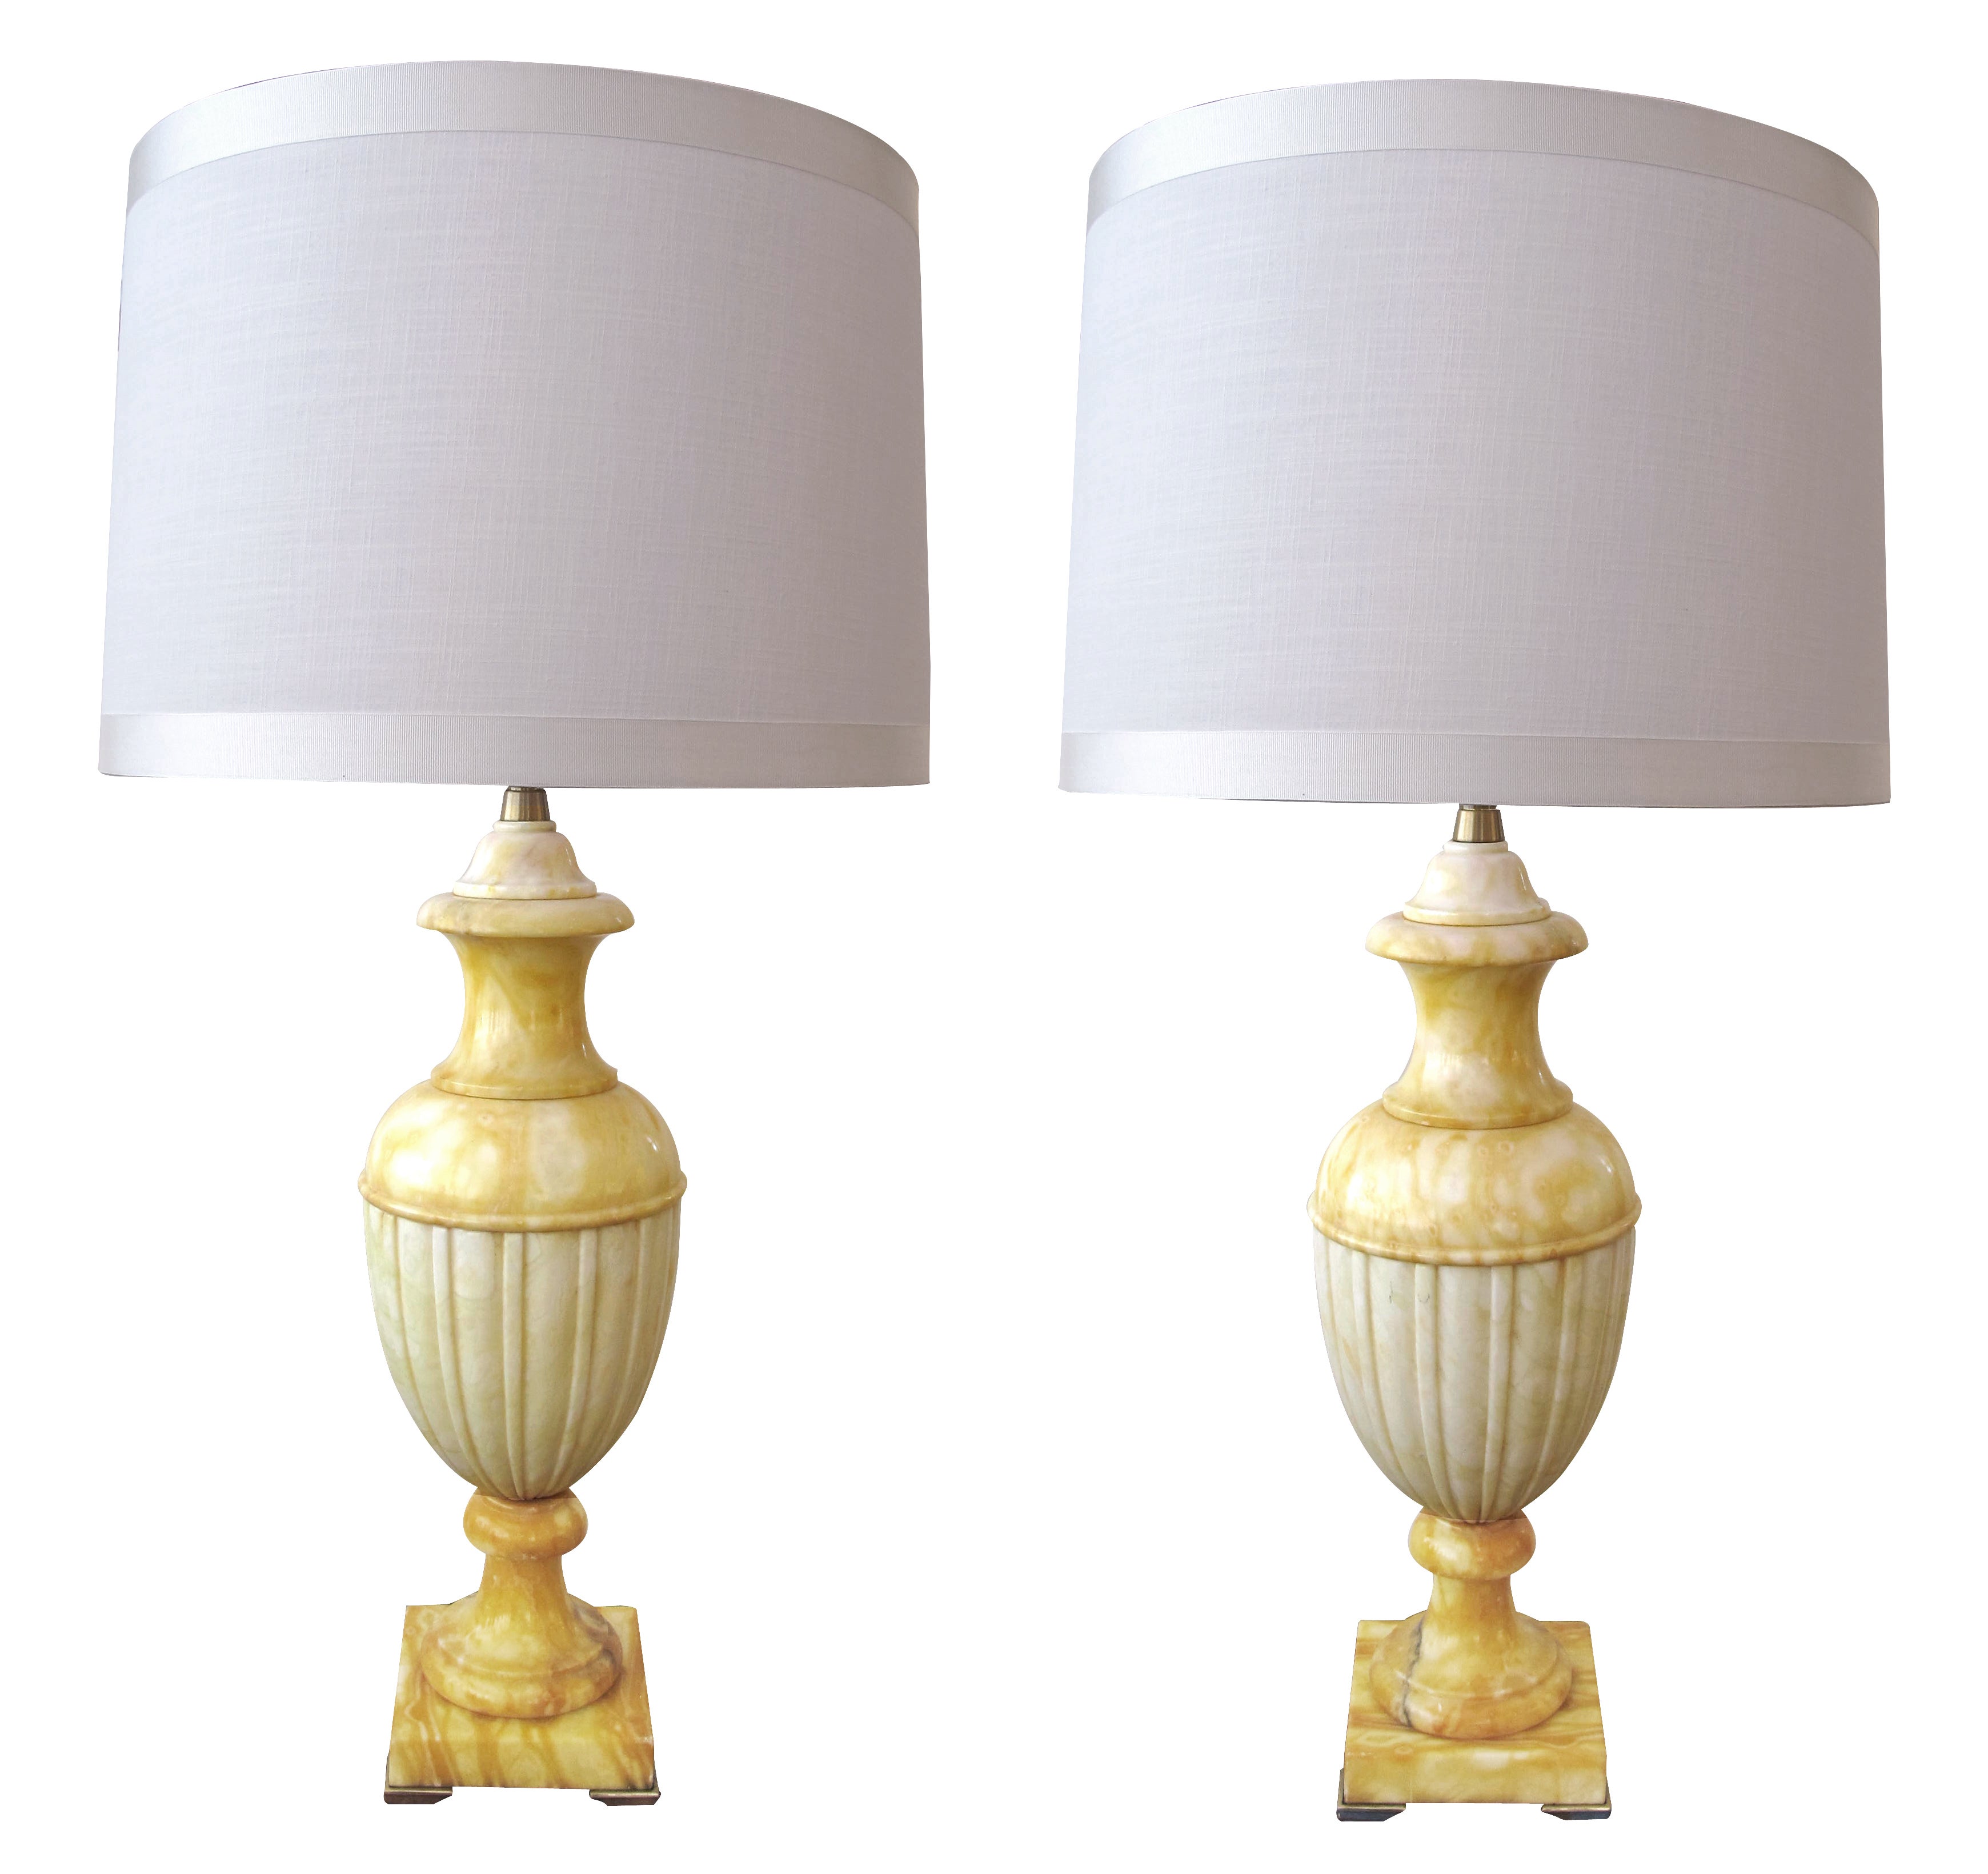 A Large-Scaled Pair of Italian Urn-Form Alabaster Lamps; Marbro Lamp Co. 